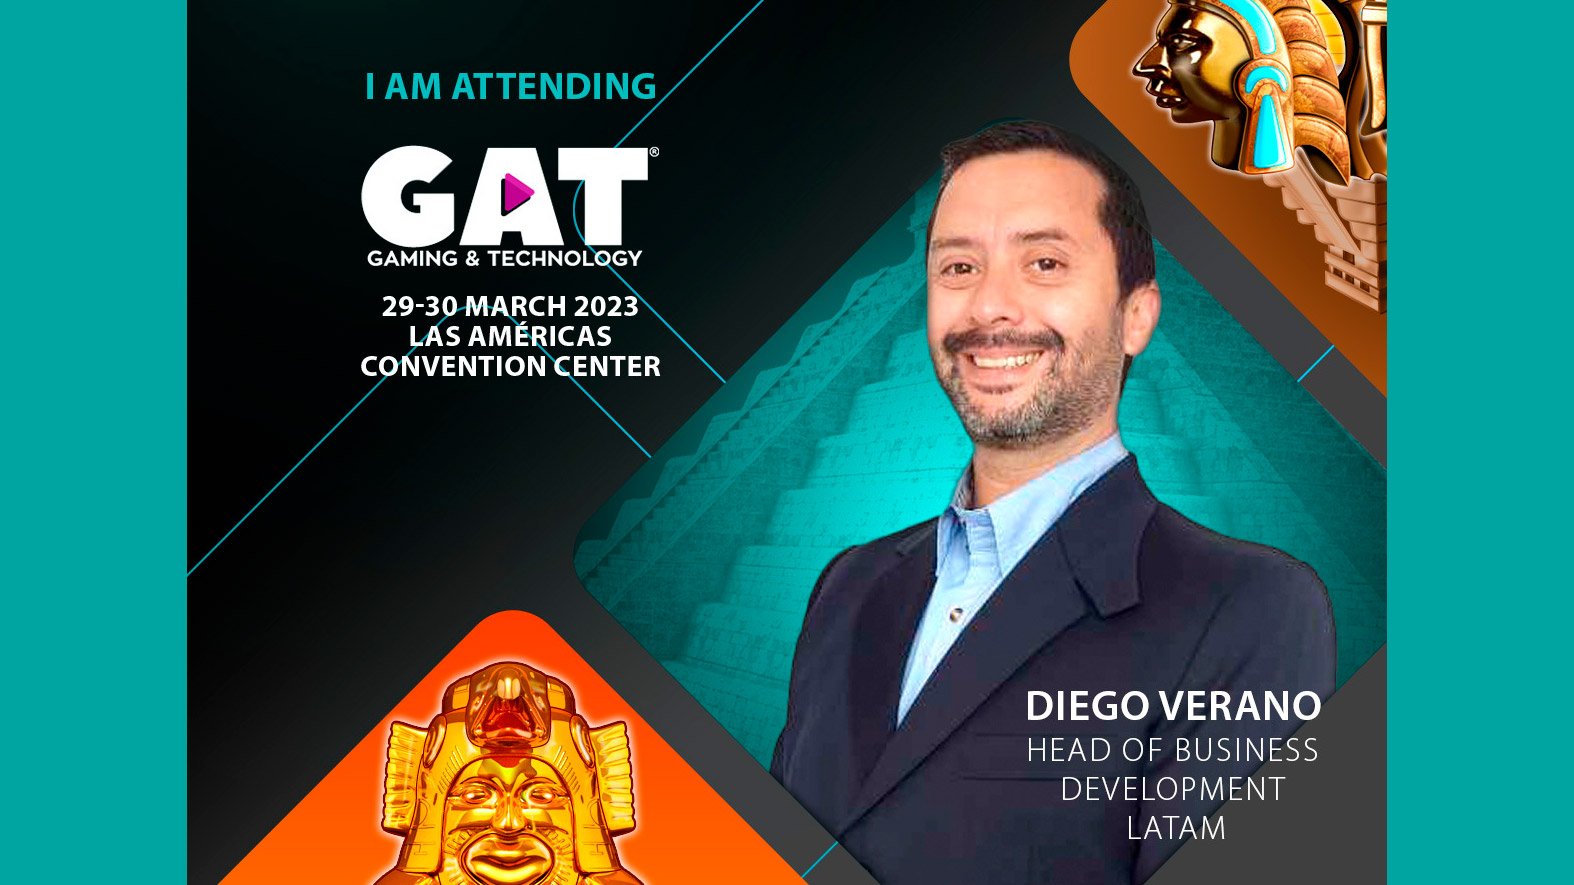 CT Interactive’s Head of Enterprise Growth Diego Verano to attend GAT Expo in Cartagena